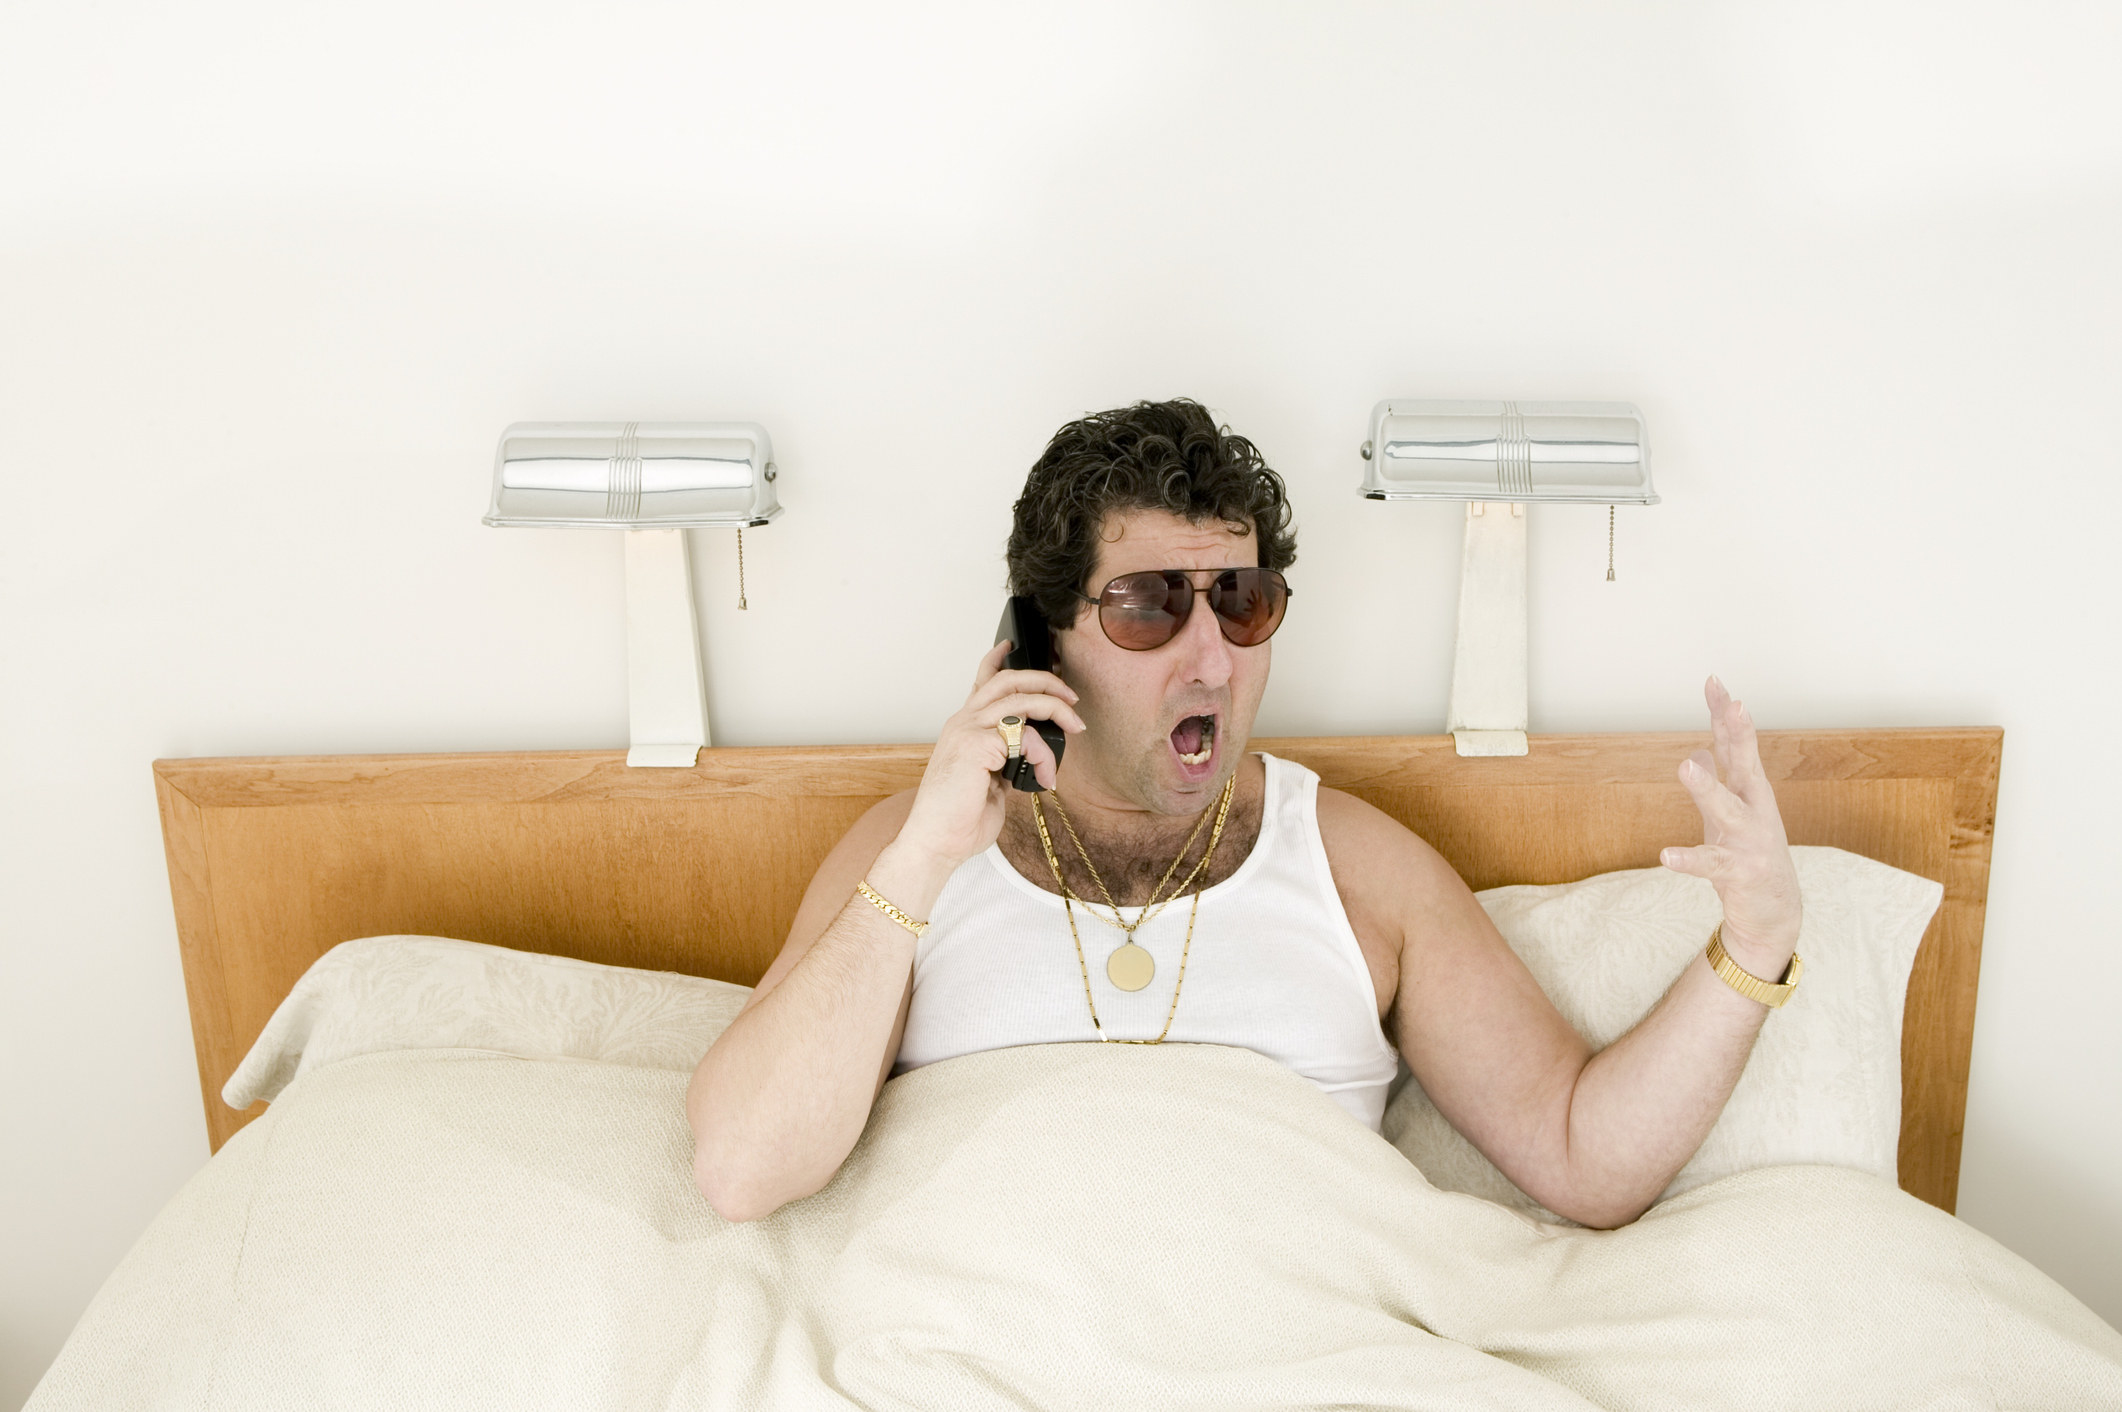 A man in bed wearing a tank top, chains, and sunglasses, yelling into a phone and gesturing with his hand